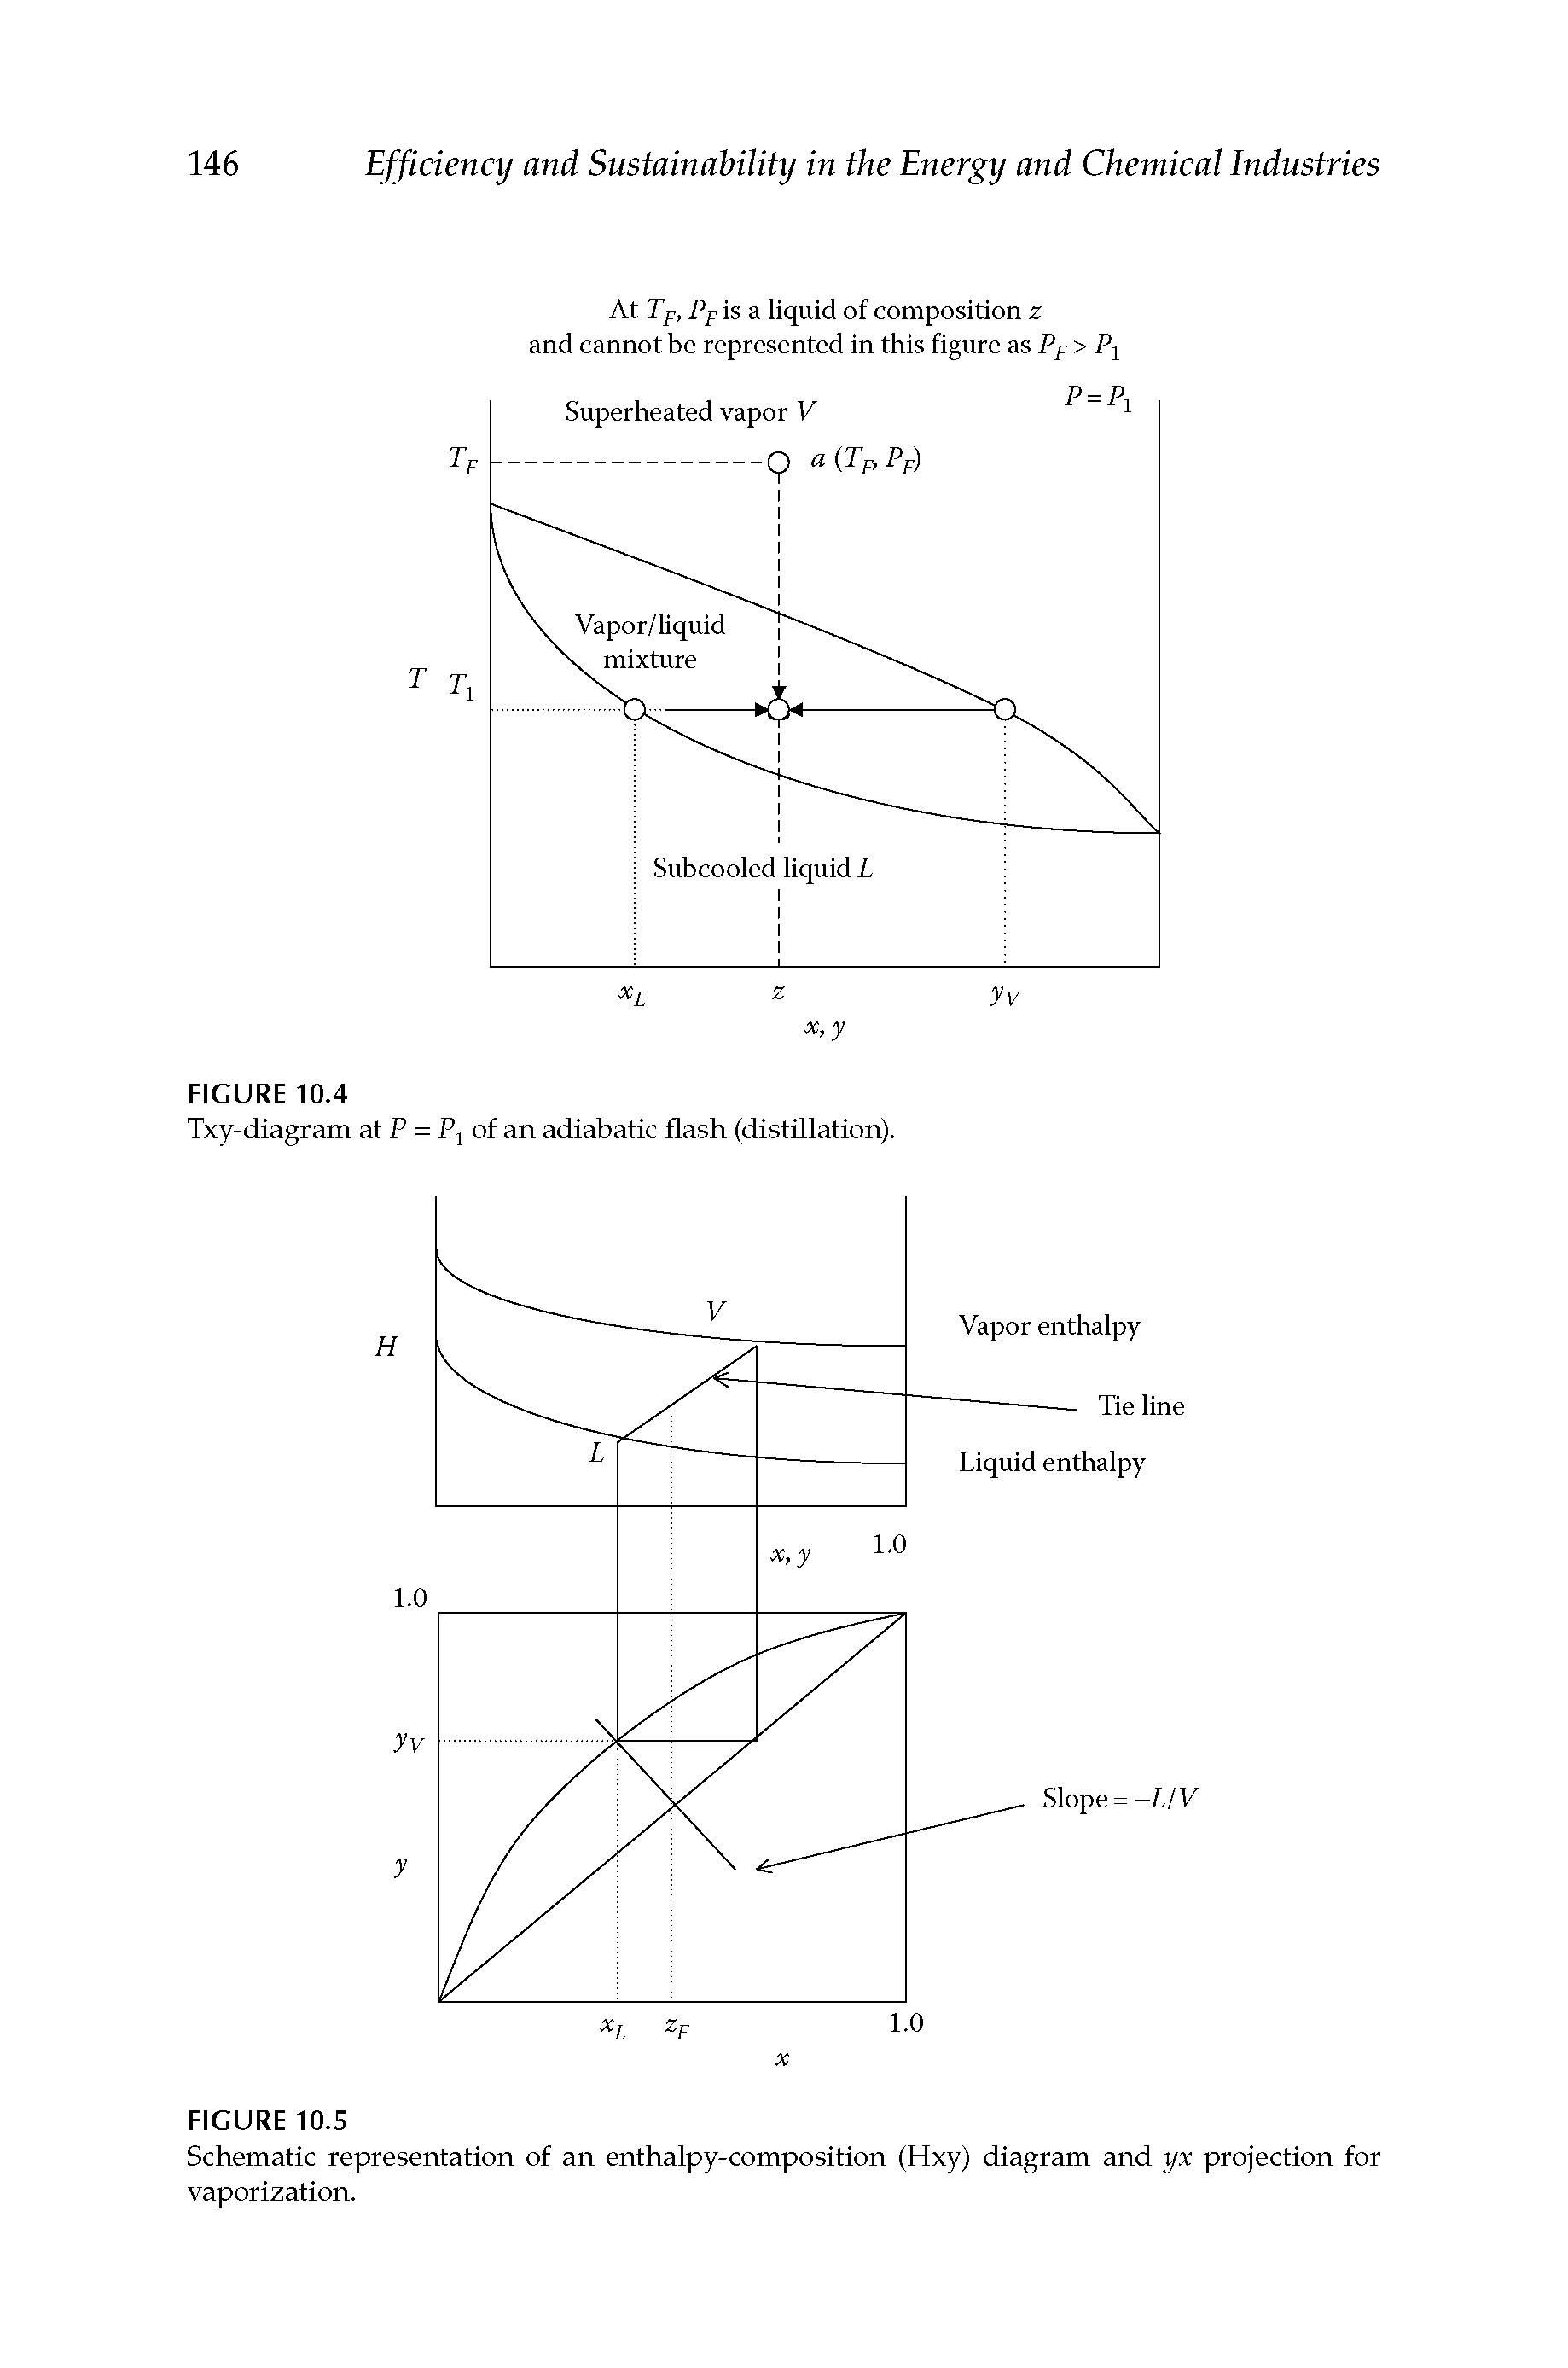 Schematic representation of an enthalpy-composition (Hxy) diagram and yx projection for vaporization.